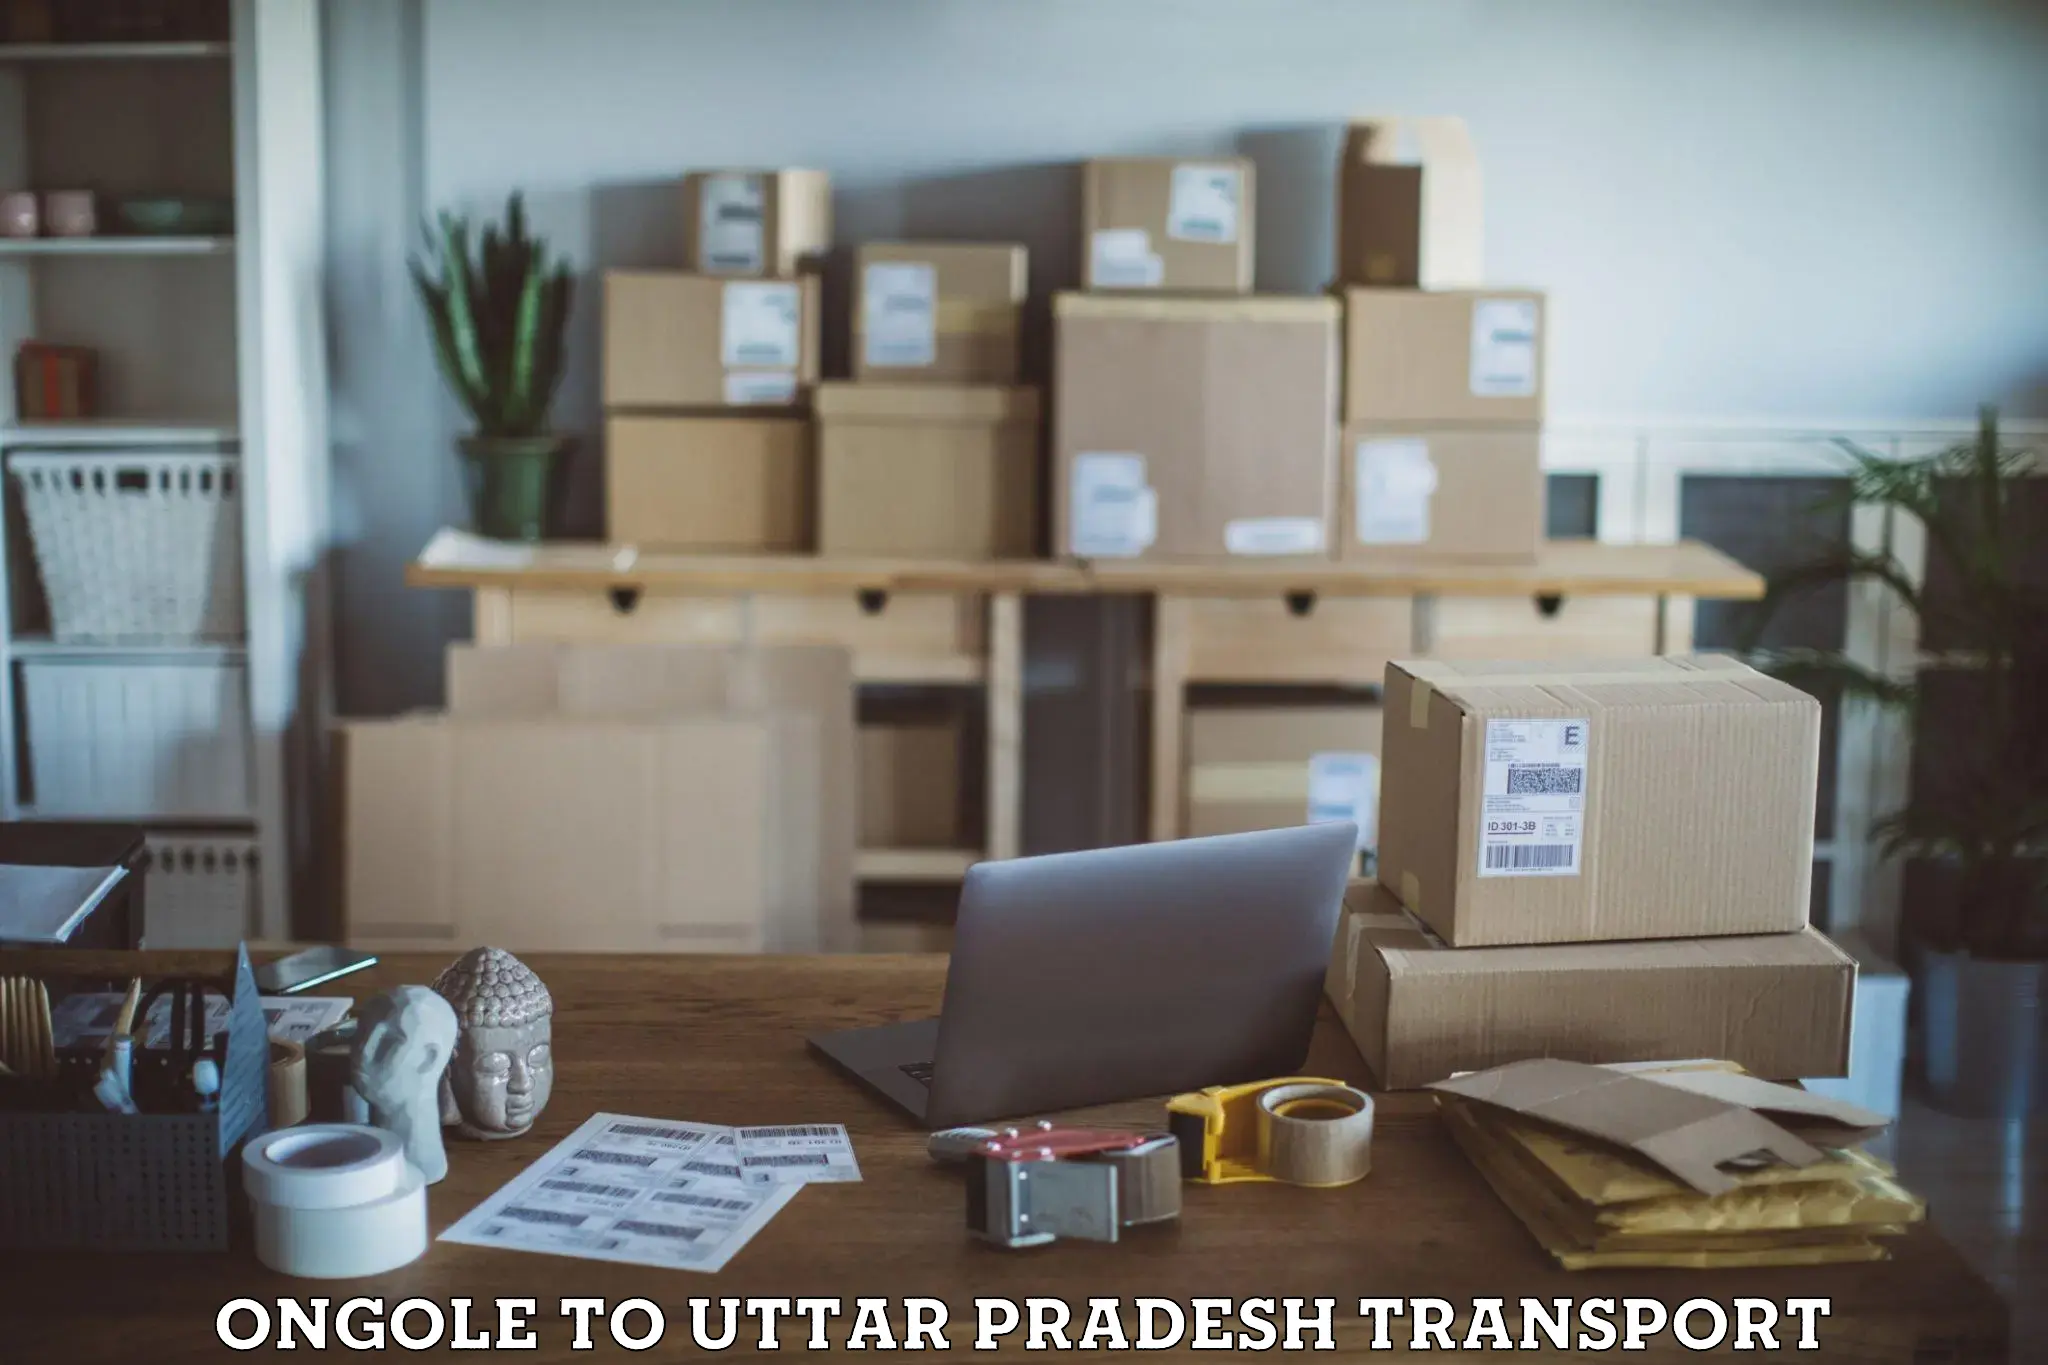 Daily parcel service transport Ongole to Gola